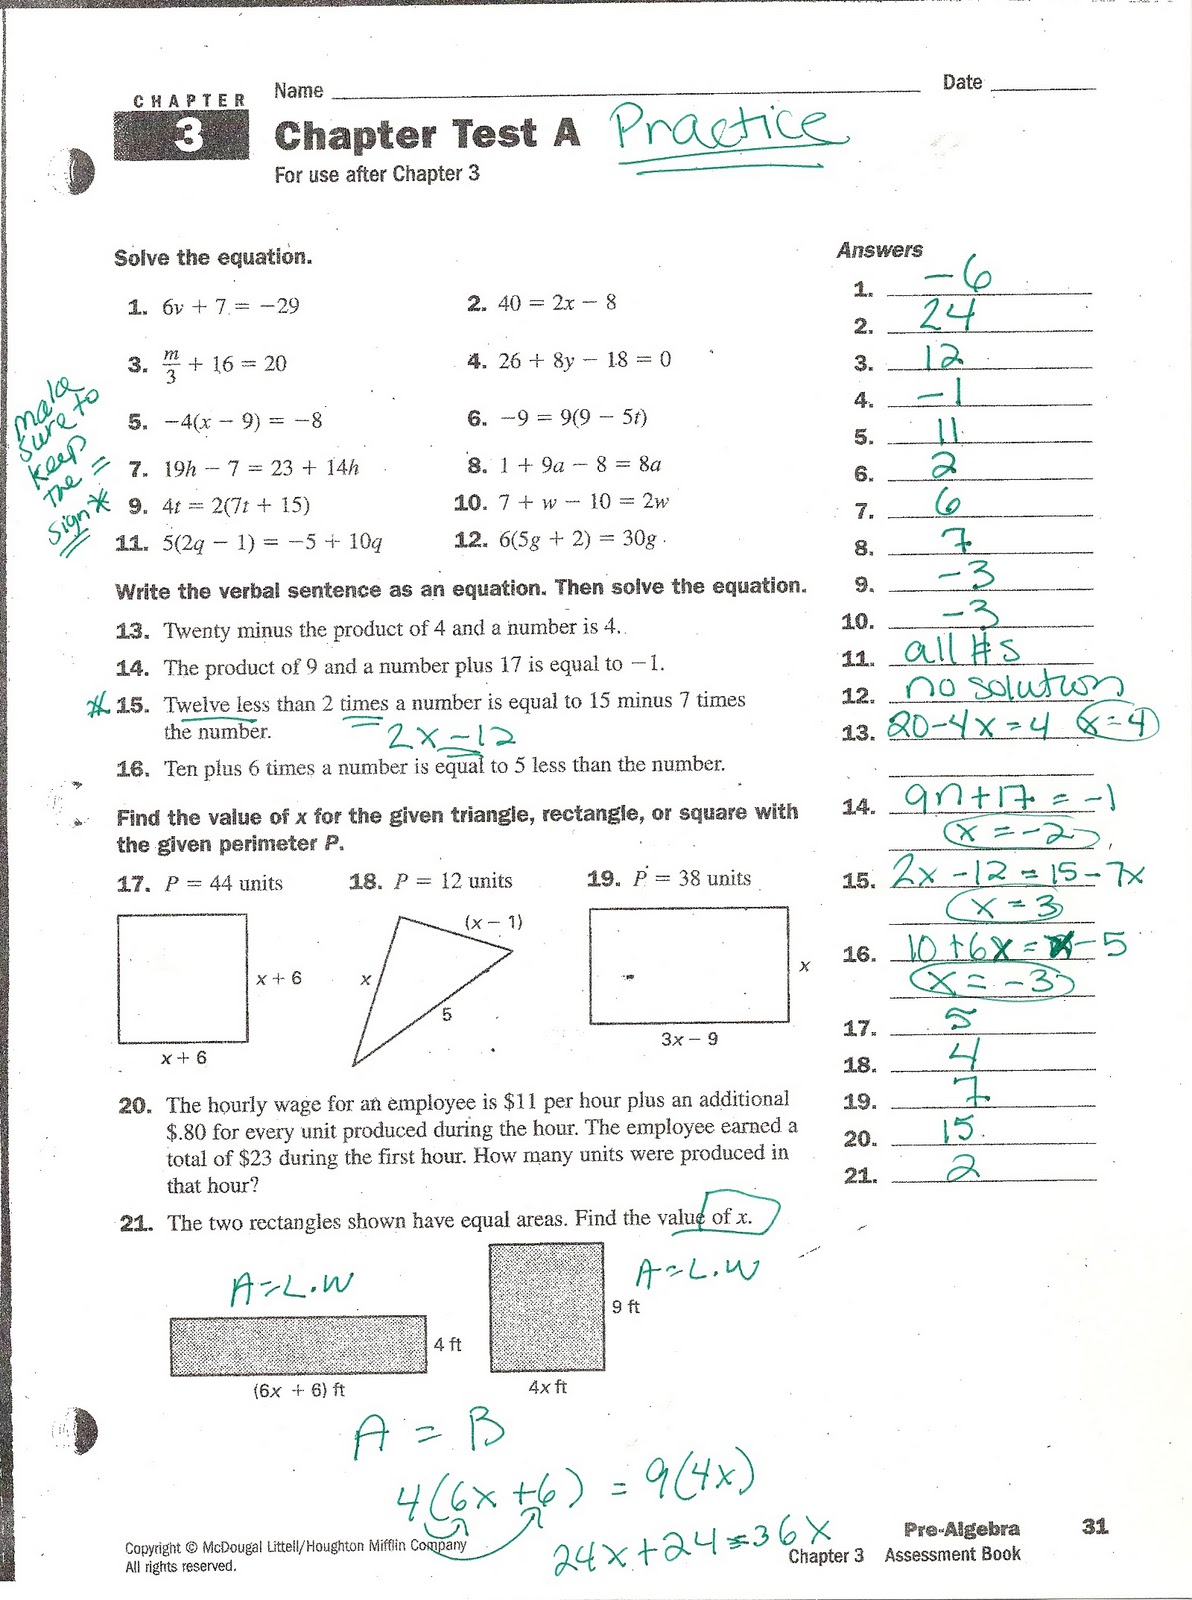 Statistics Homework Help given by Experts